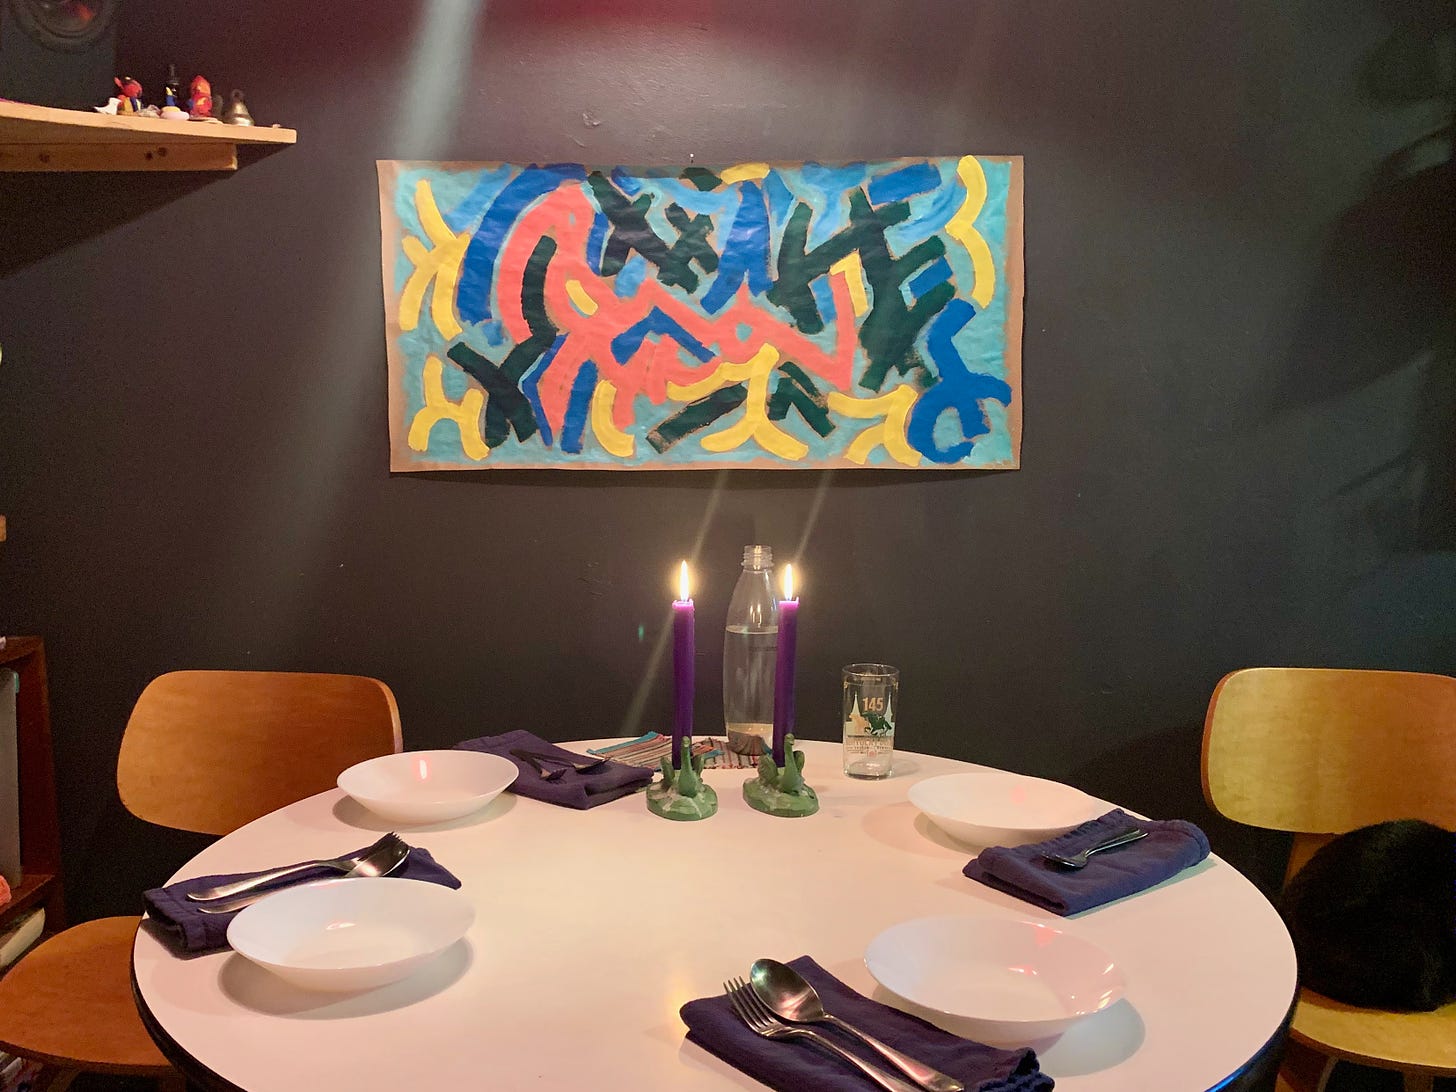 A round kitchen table, set for dinner, two blue candles are burning, above the table a painting with colors like, peach, royal blue, light blue, yellow - dance in abstraction.